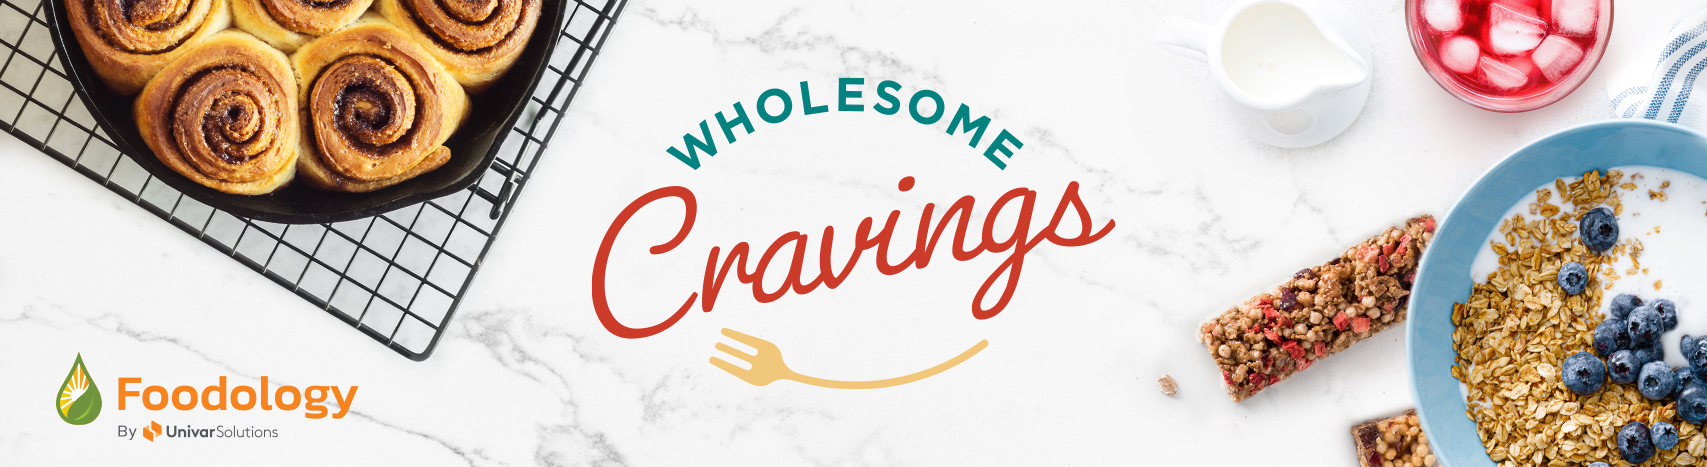 Wholesome Cravings from Foodology